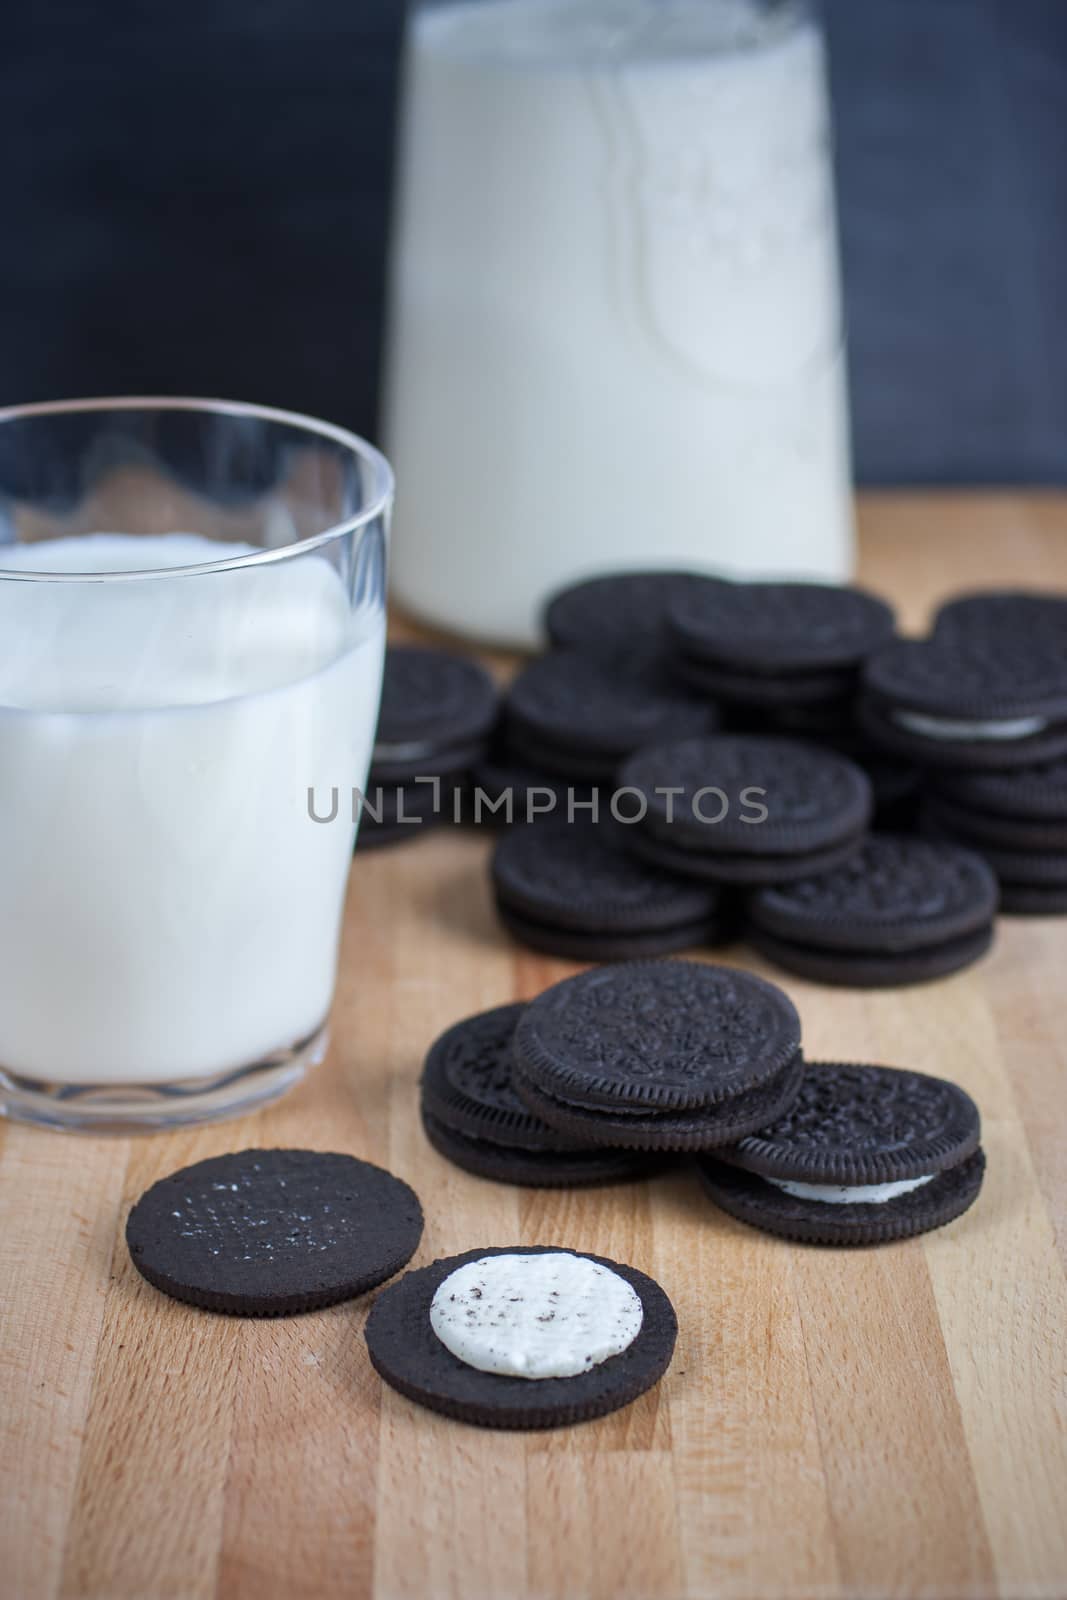 Chocolate sandwich cookies with vanilla creme filling and milk.